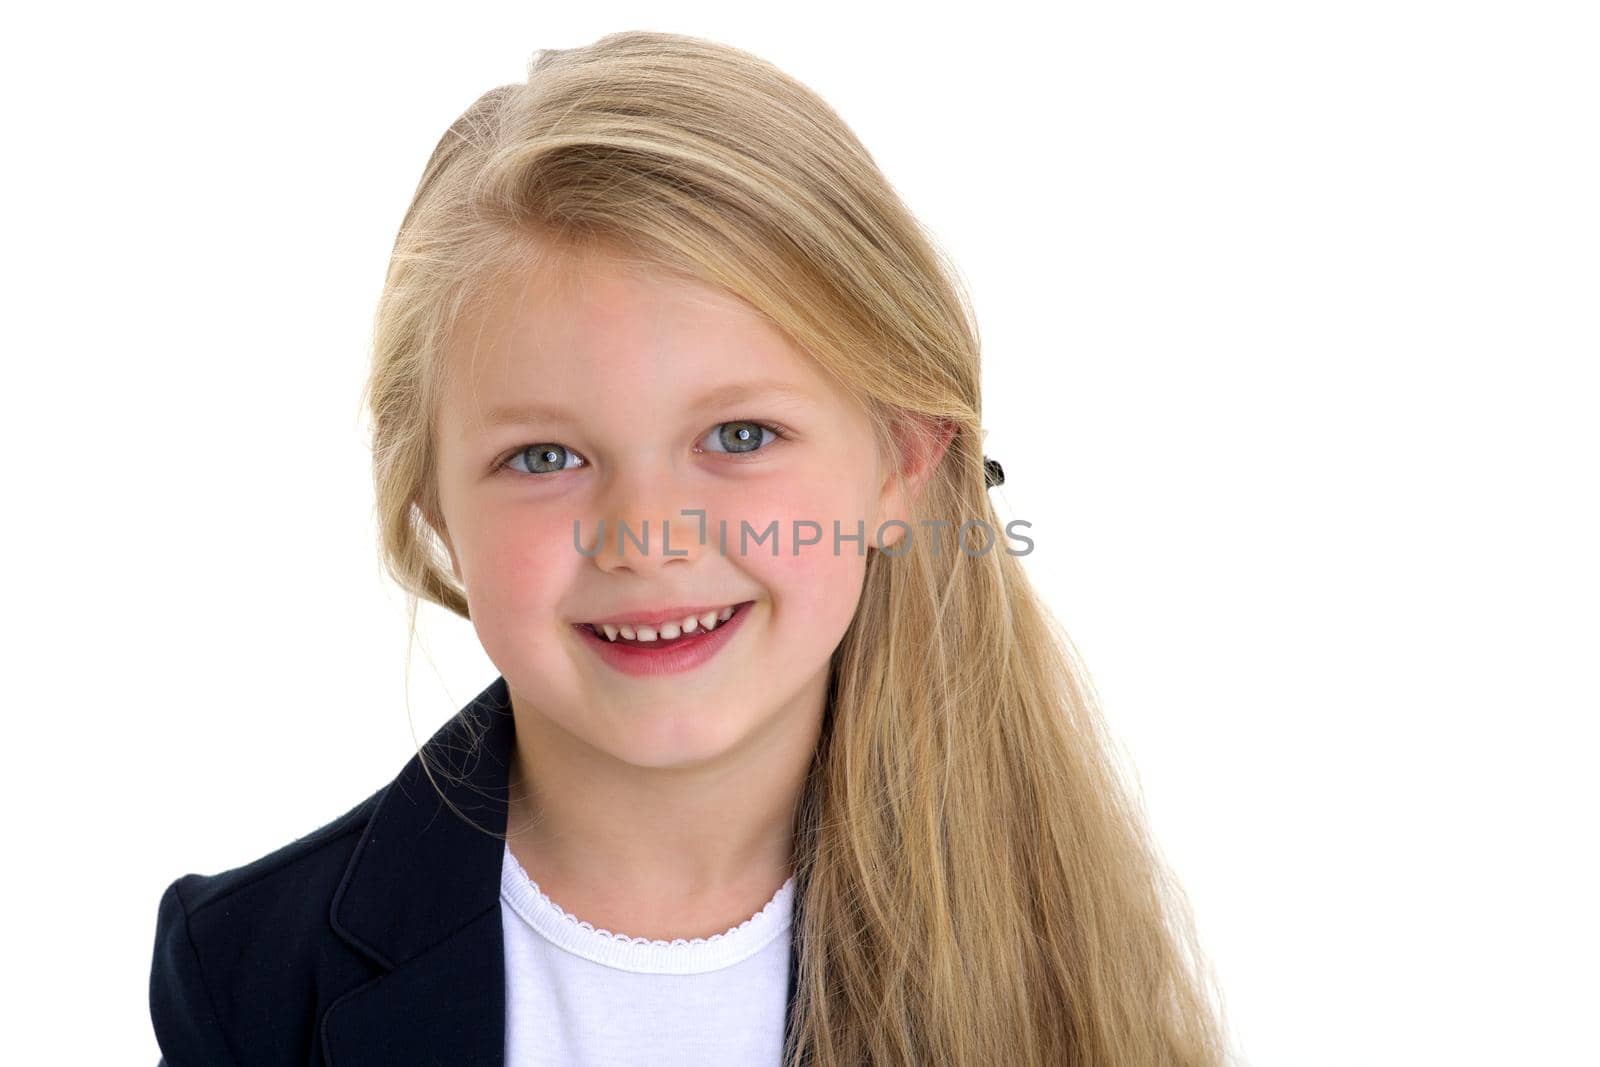 Portrait of adorable blonde little girl. Curious beautiful long haired schoolgirl standing against white background. Lovely elementary school student in blue jacket and white blouse